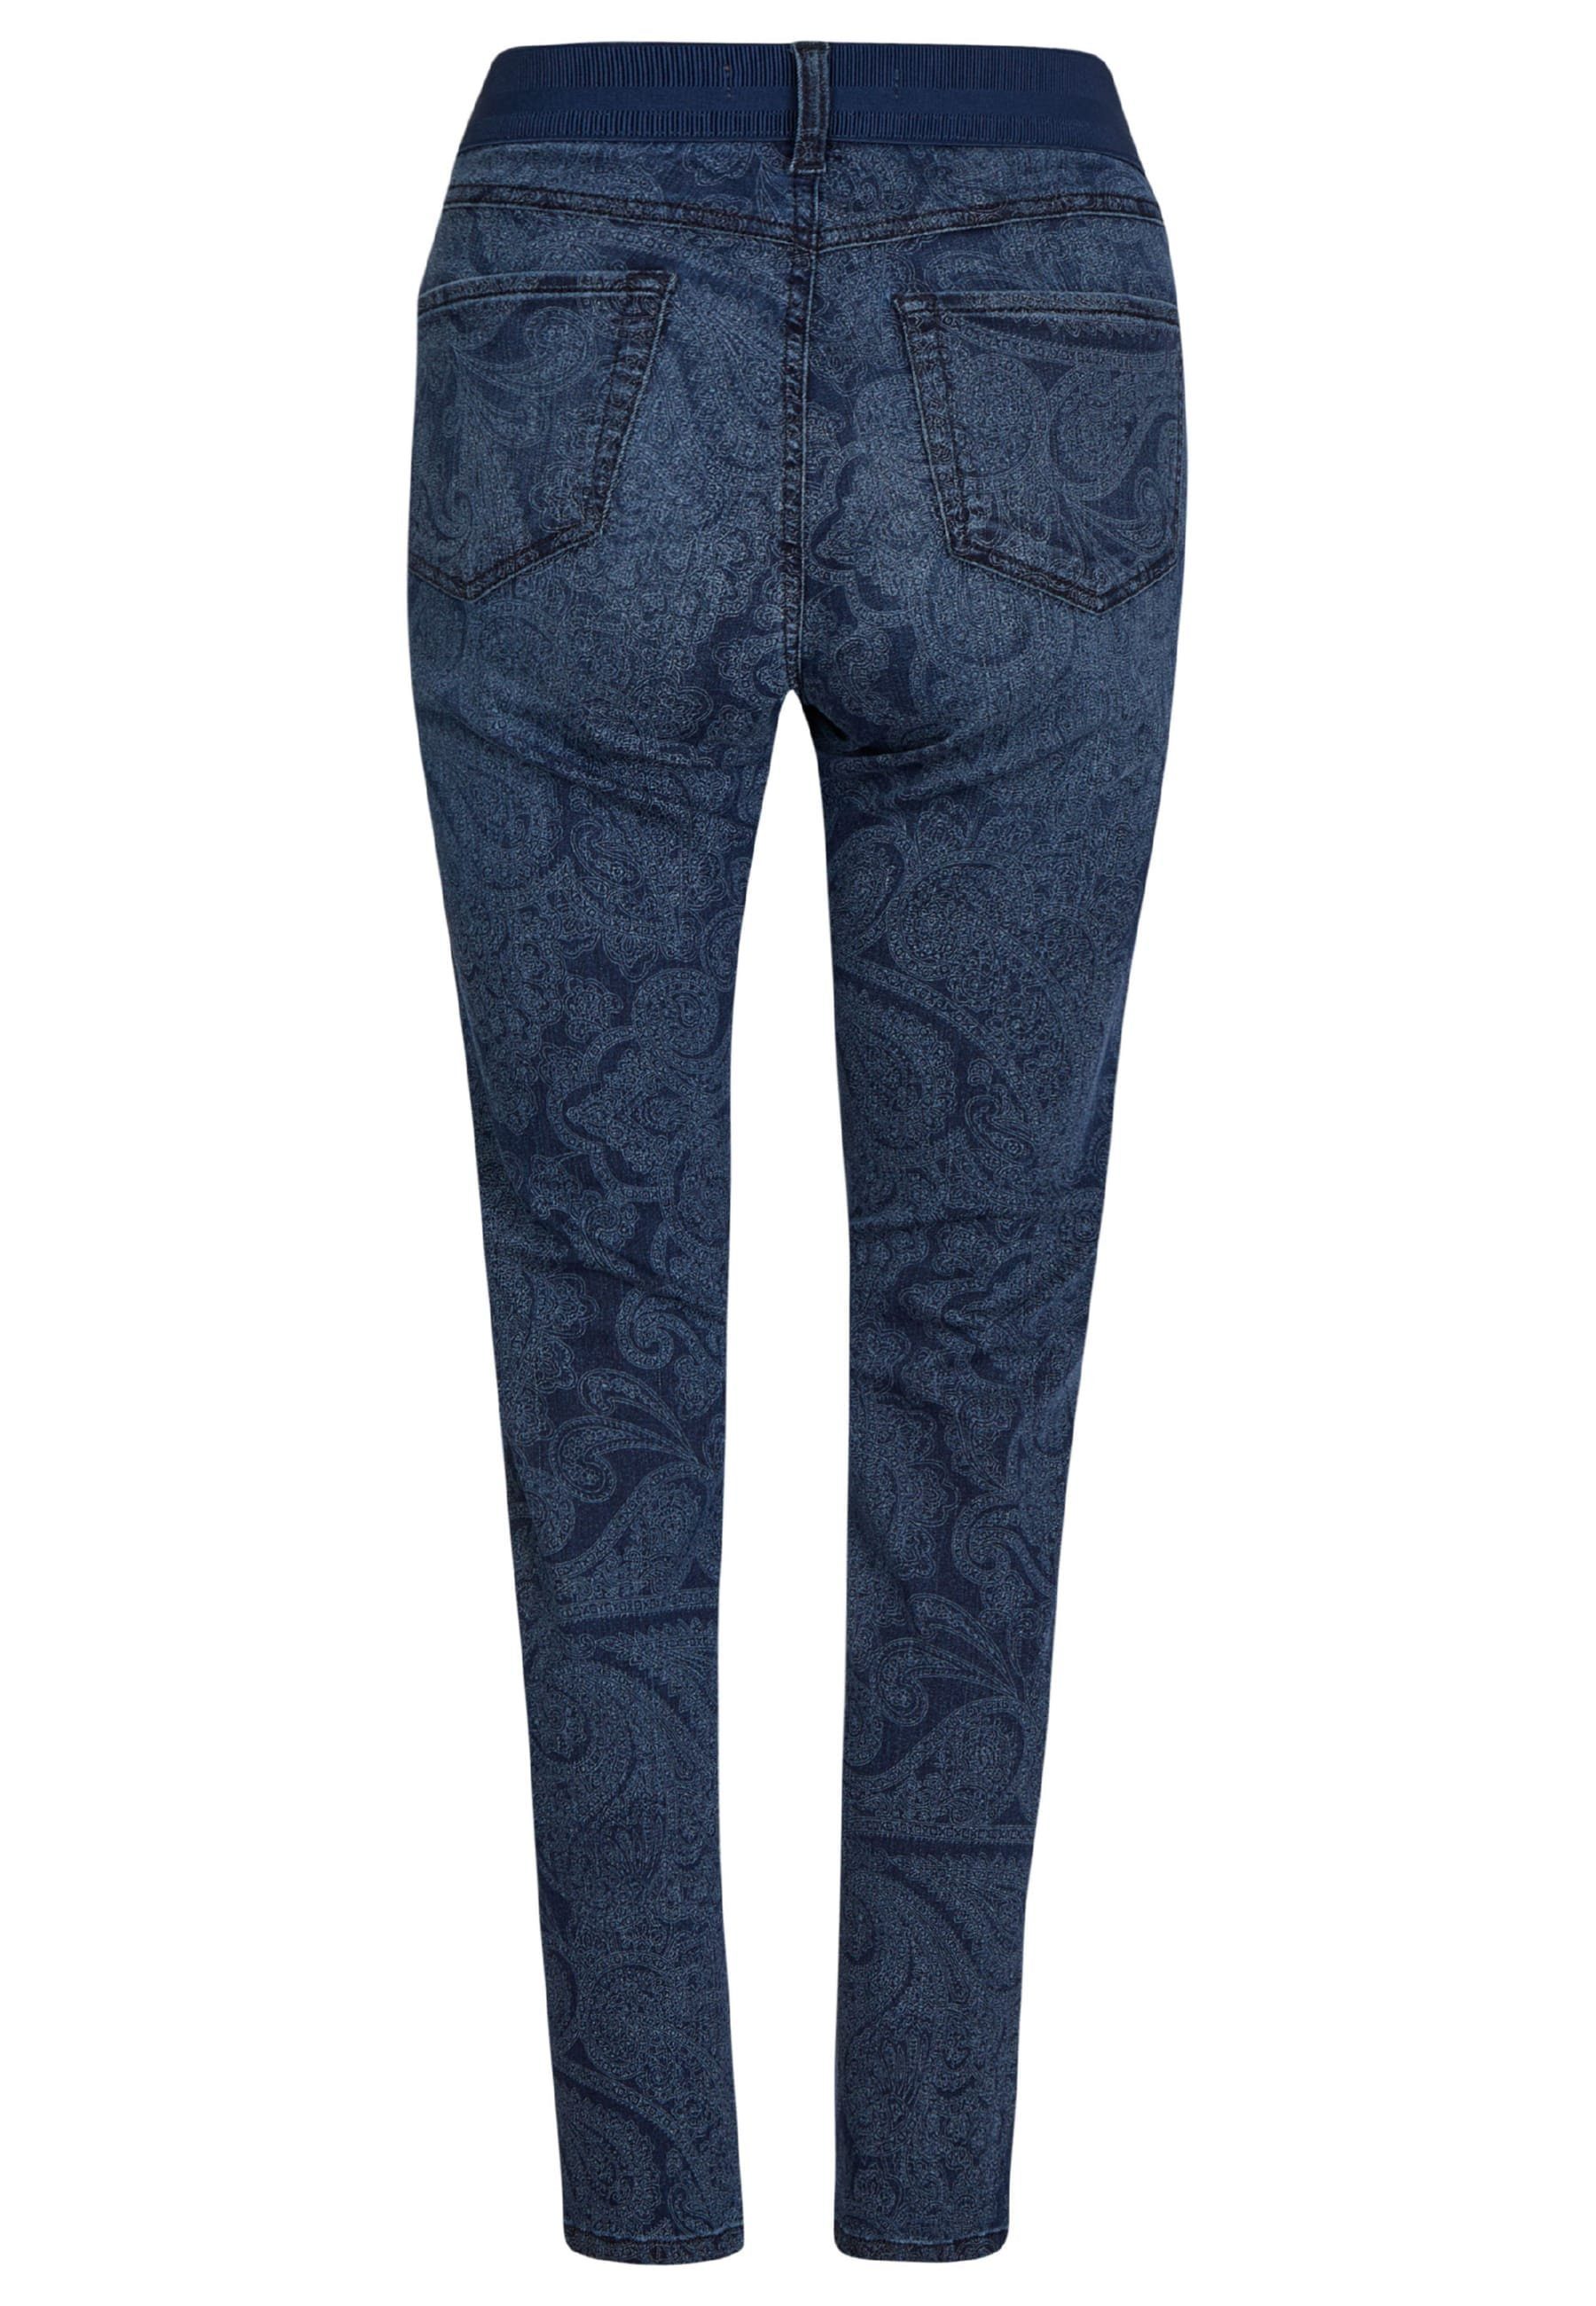 ANGELS Slim-fit-Jeans Size mit Paisley-Muster One blue Jeans Label-Applikationen mit